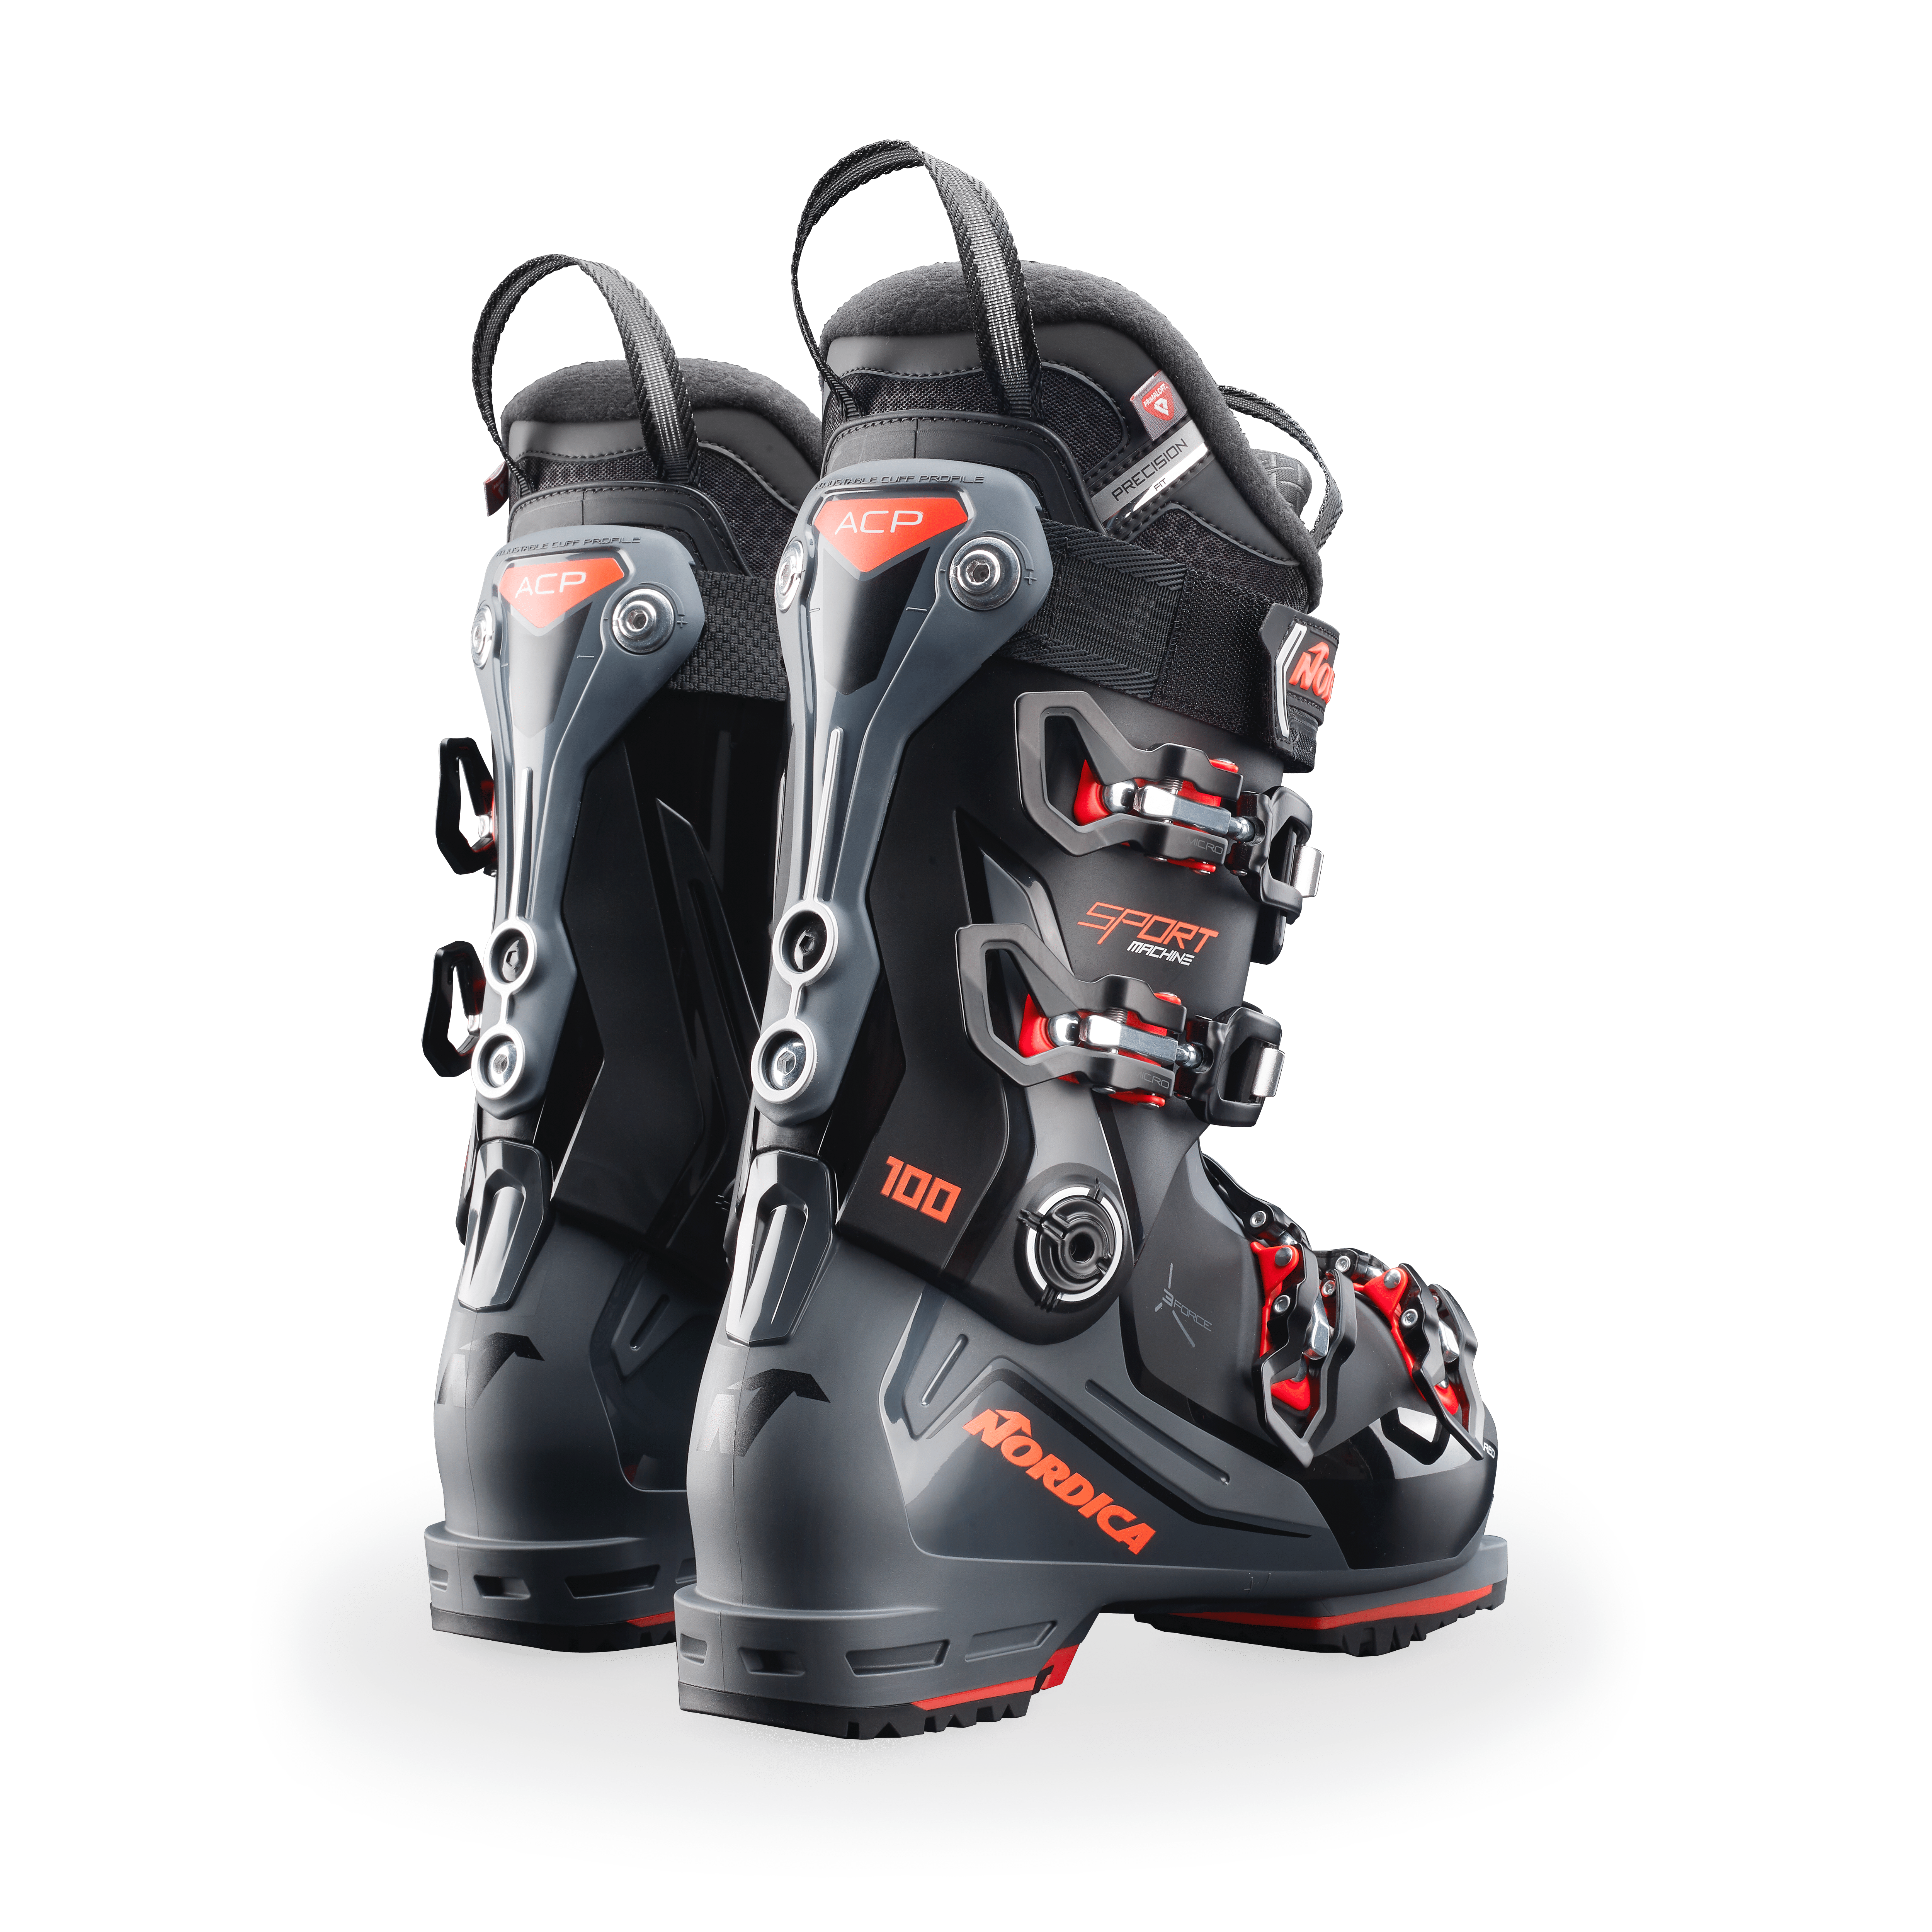 SPORTMACHINE 3 100 (GW) Nordica - Skis and Boots – Official website